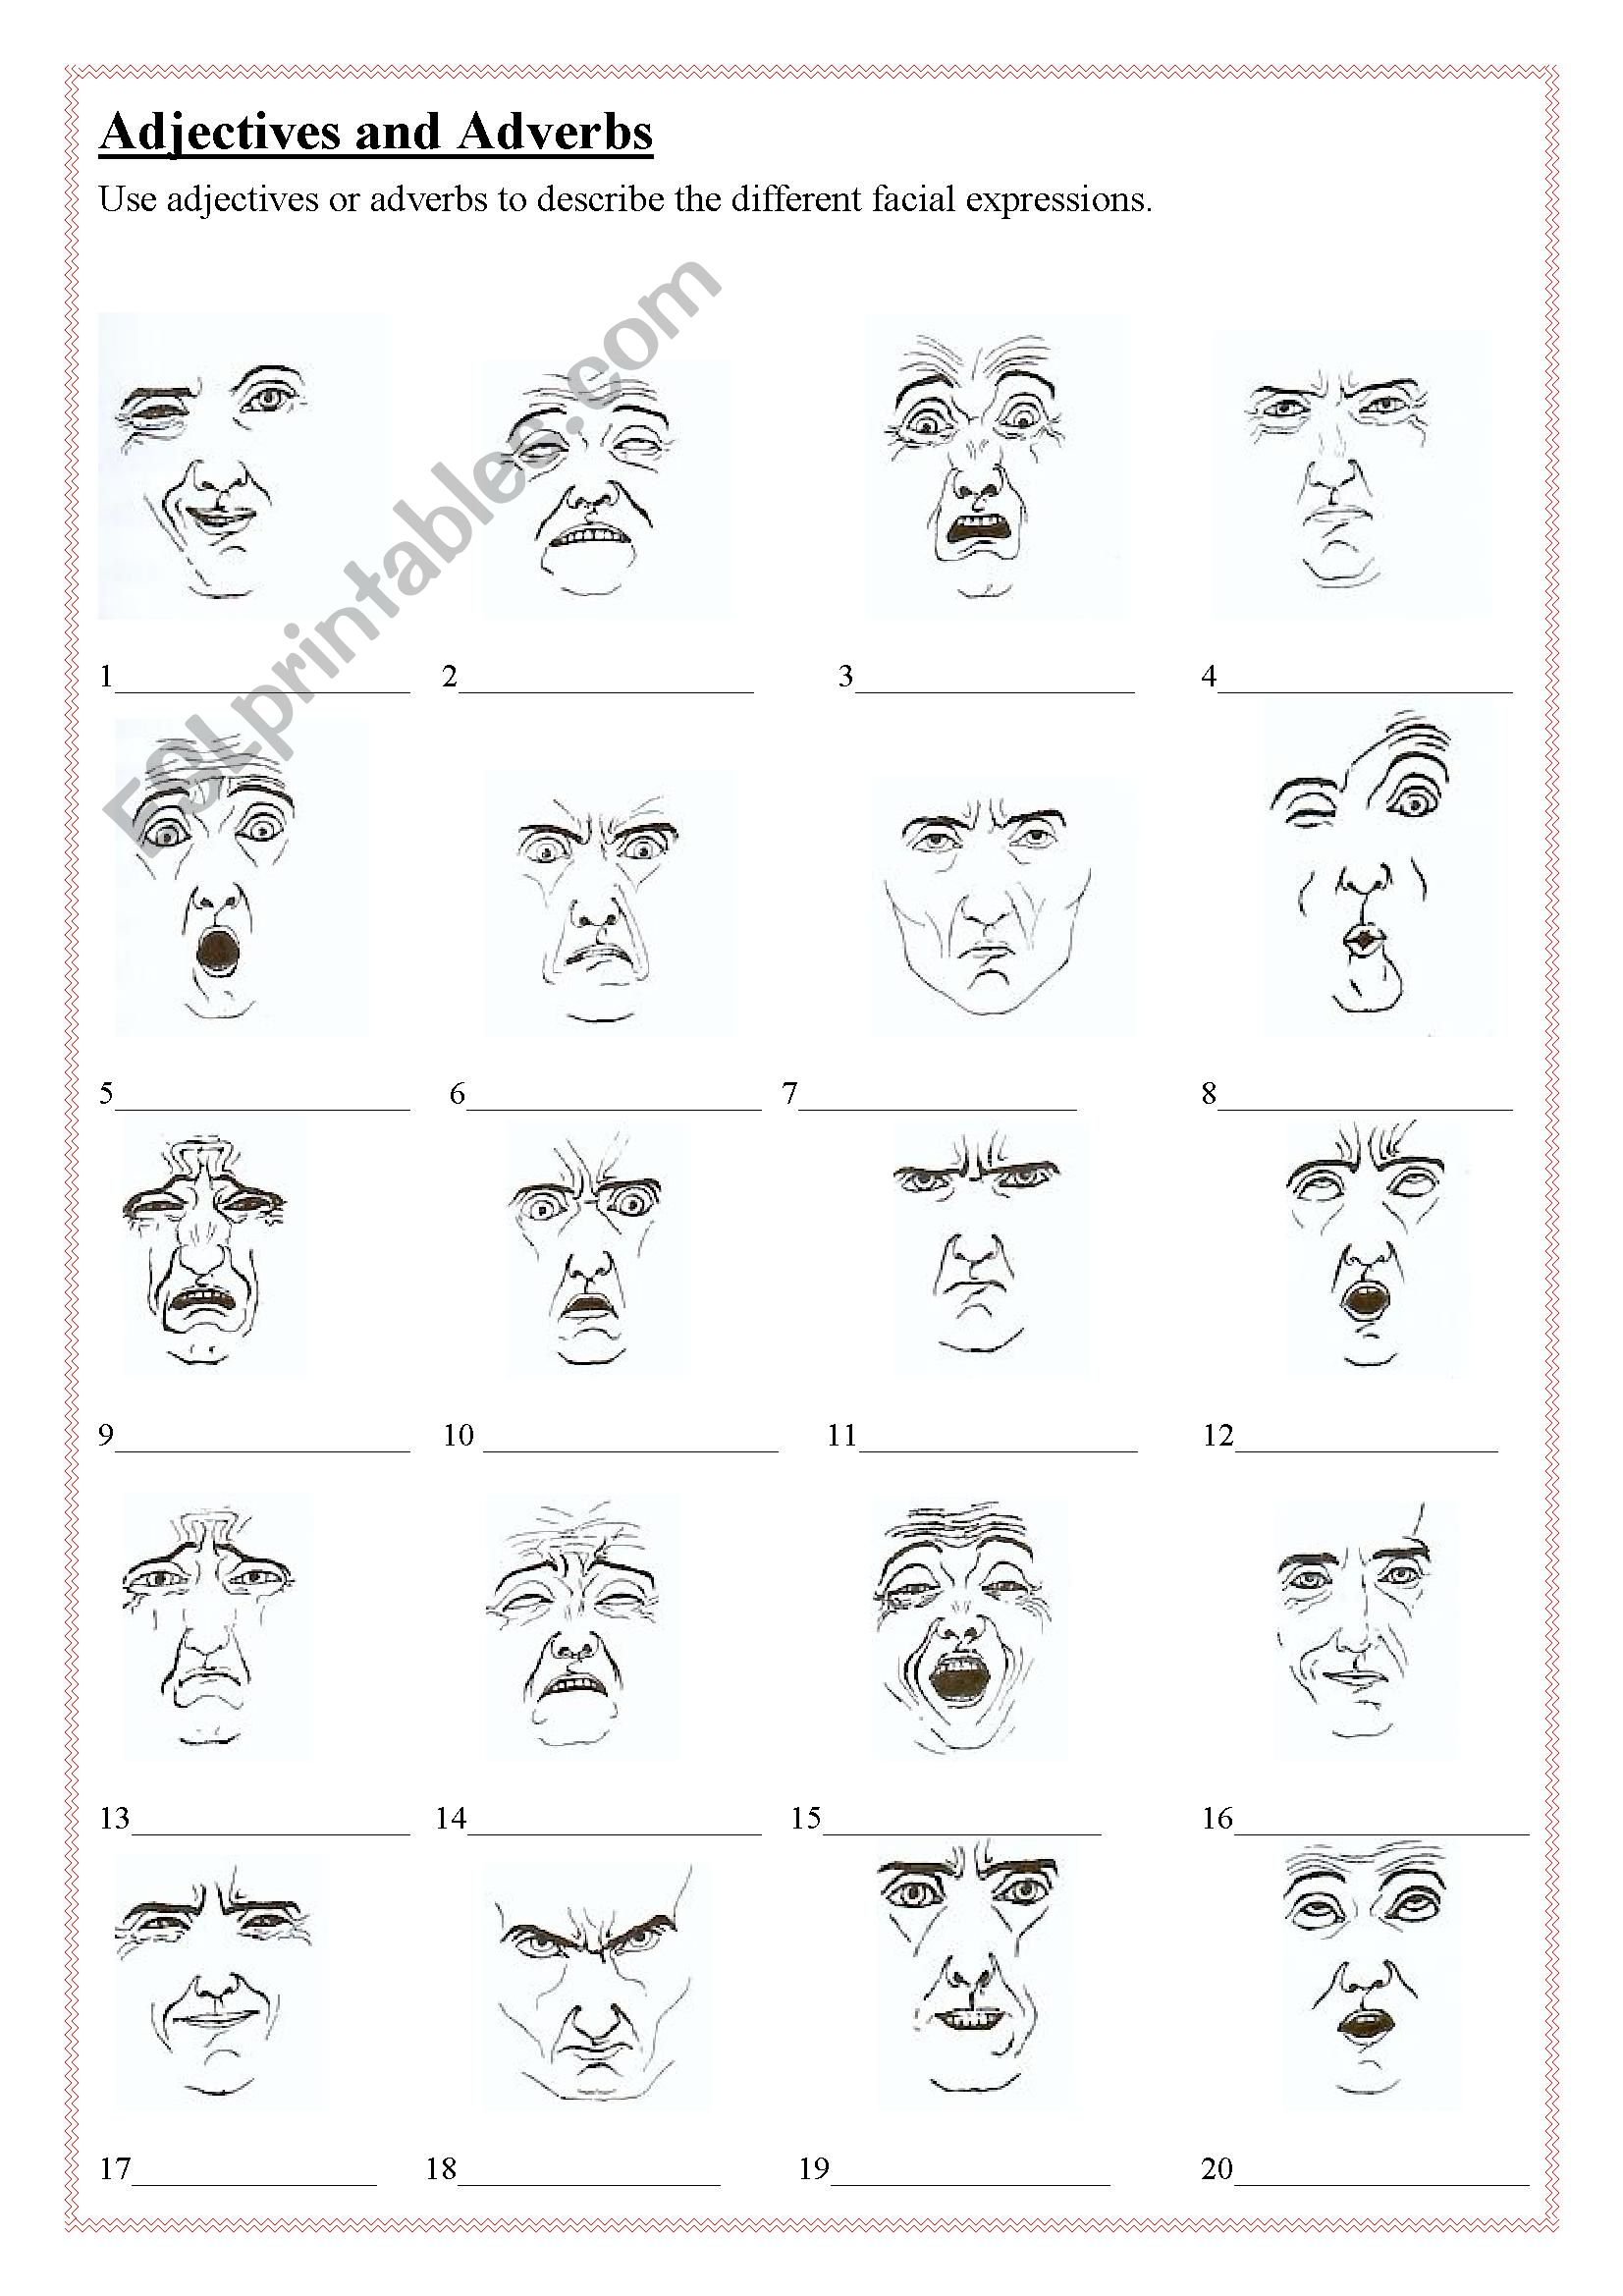 Adjectives and/or adverbs - describe the facial expressions